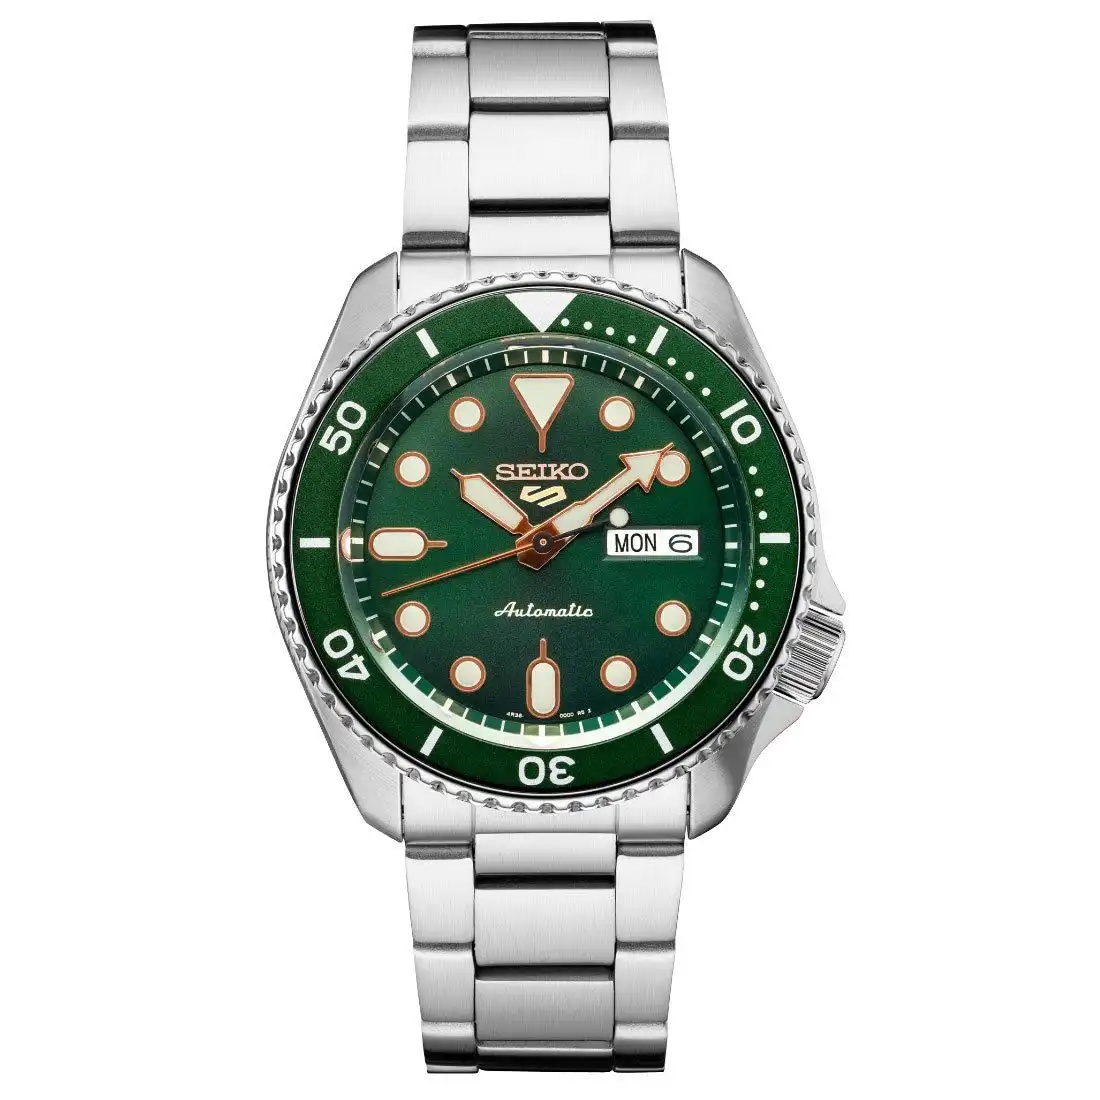 Seiko Automatic Green Face Men's Watch SRPD63